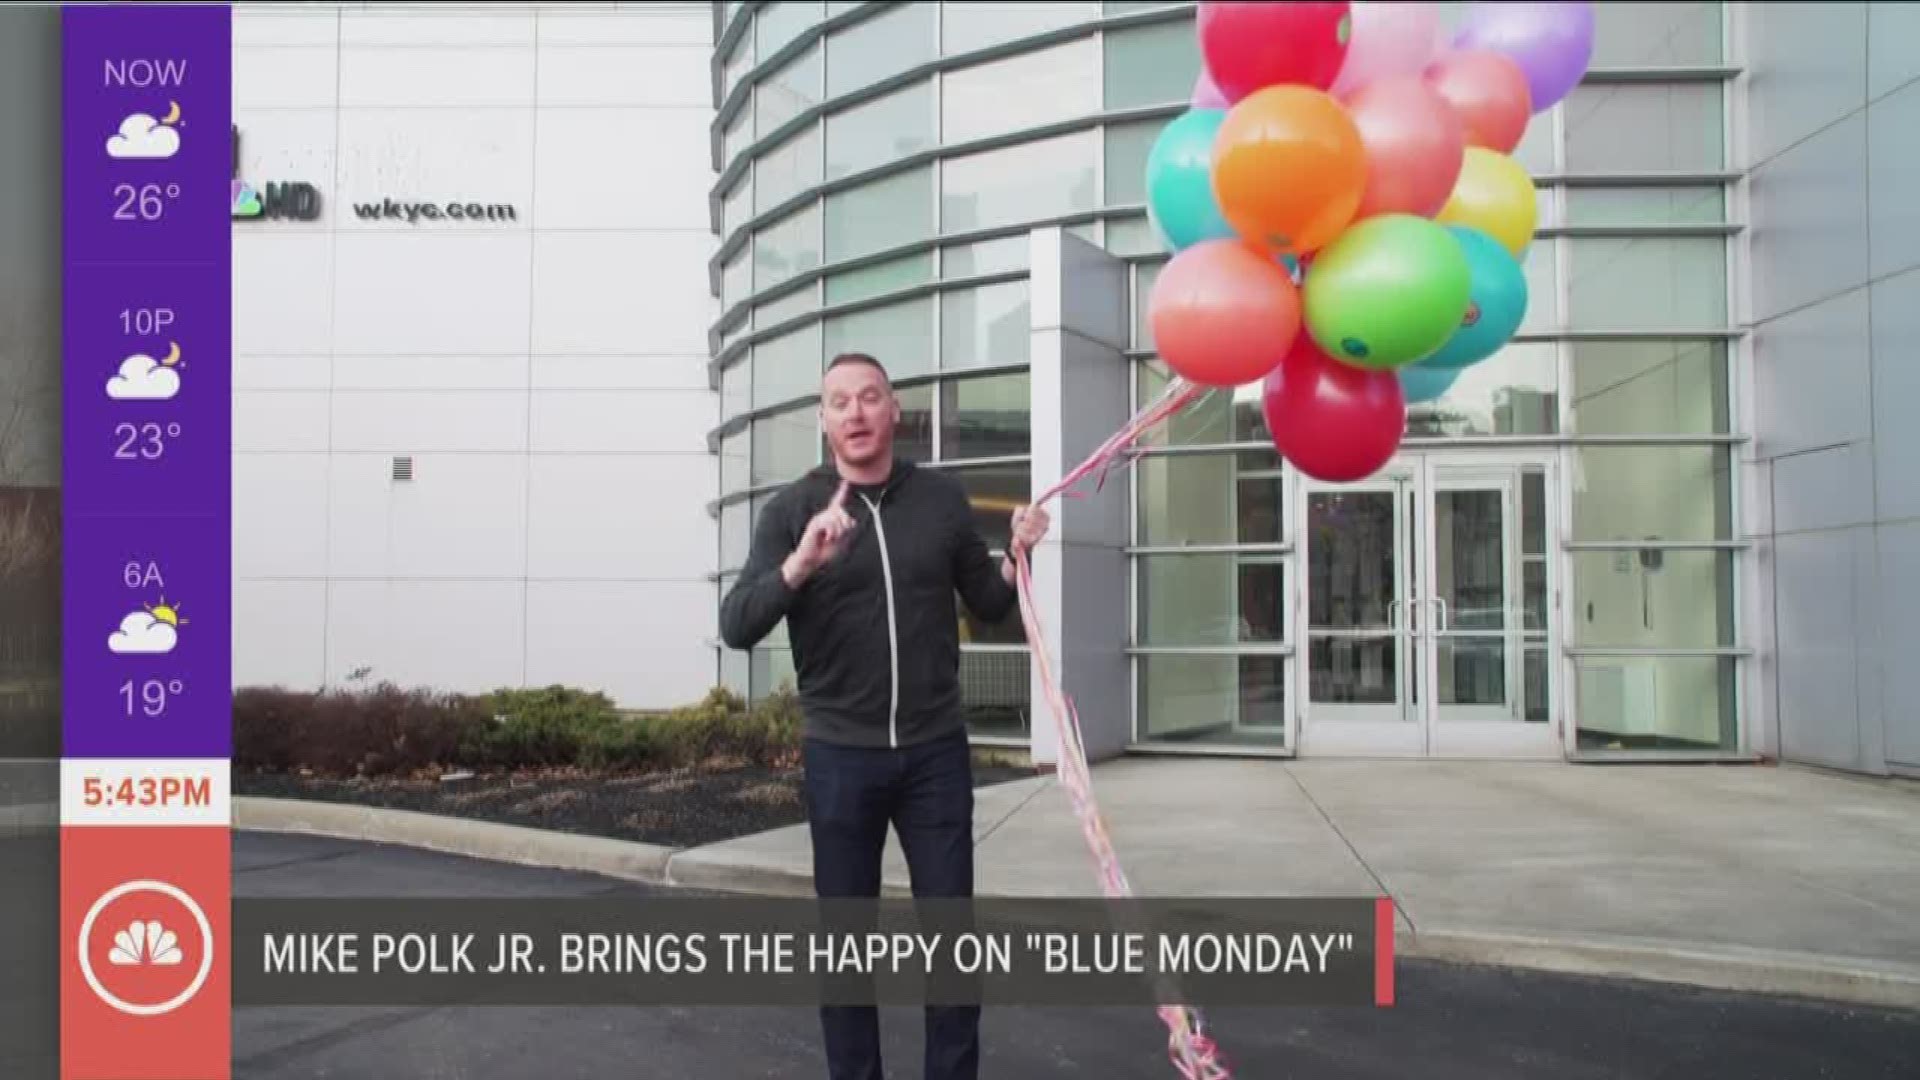 Don't be Gloomy. Mike Polk Jr. takes to the streets of Cleveland to cheer folks up!